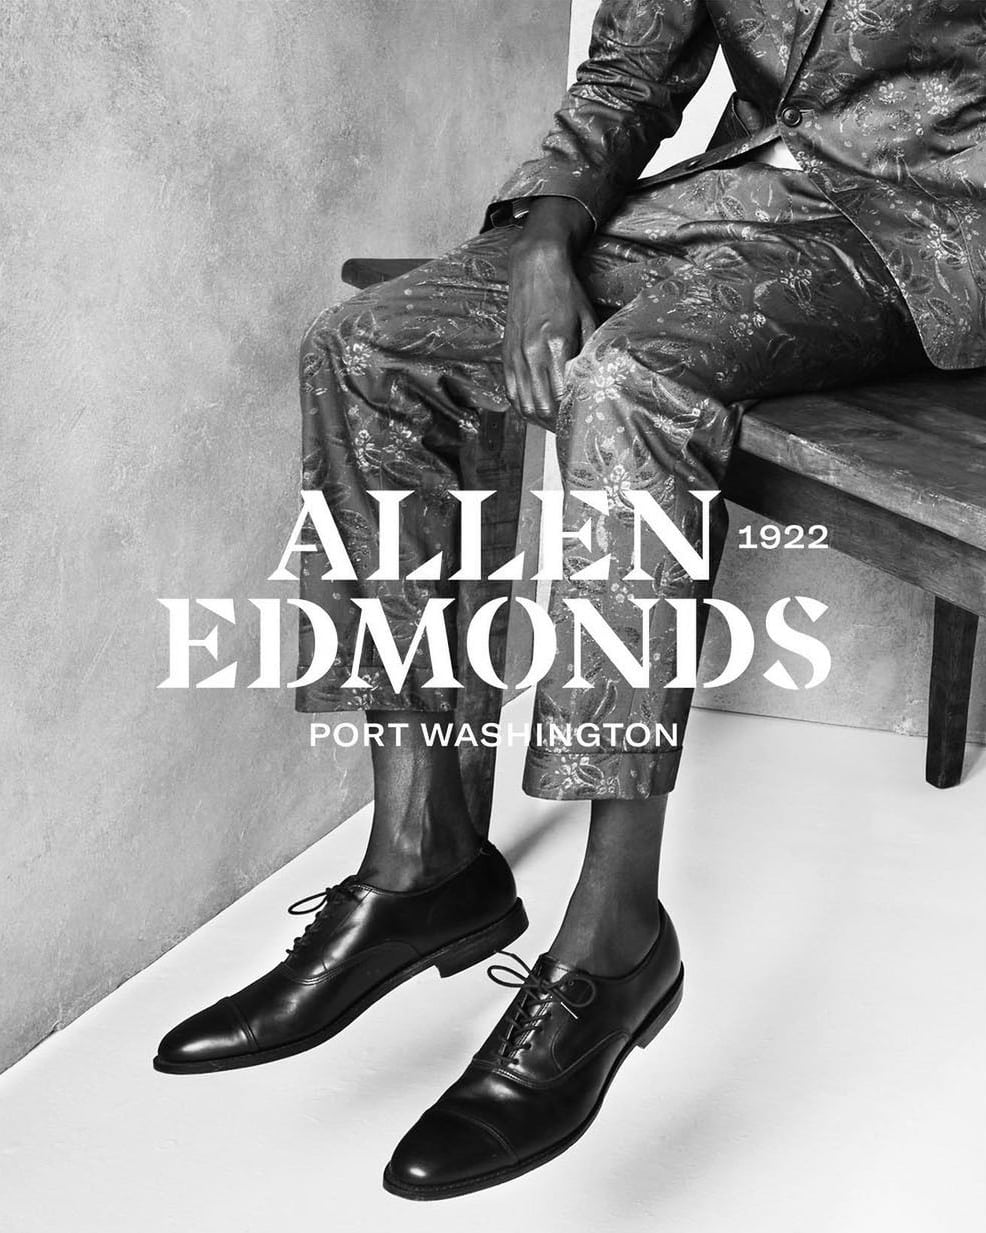 Allen Edmonds has been setting the standard for men's shoes since its establishment in 1922, known for its premium quality, craftsmanship, and classic American styling